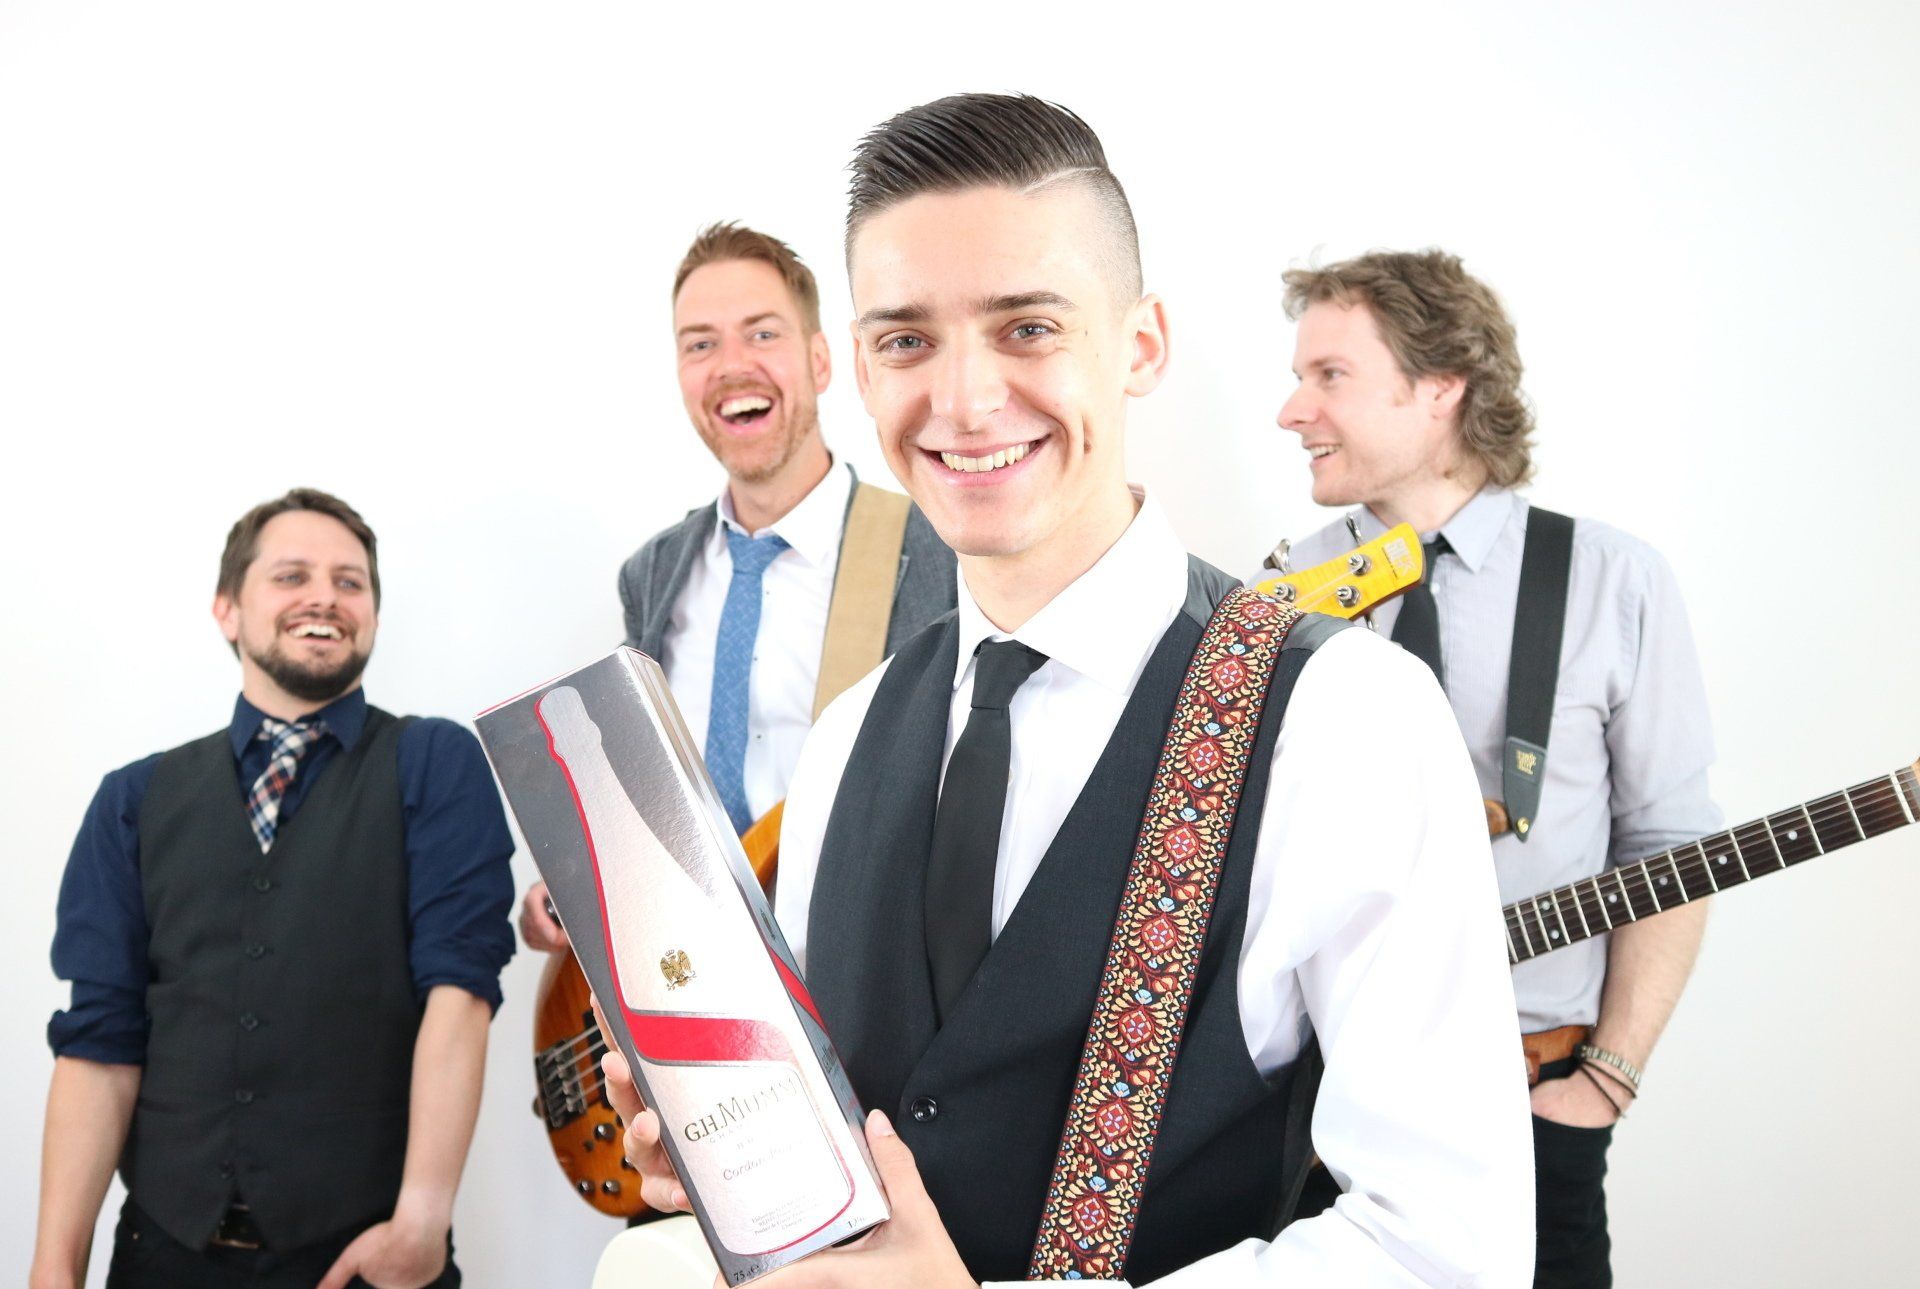 Free MUMM Champagne when you book The RockPins Live Music Band